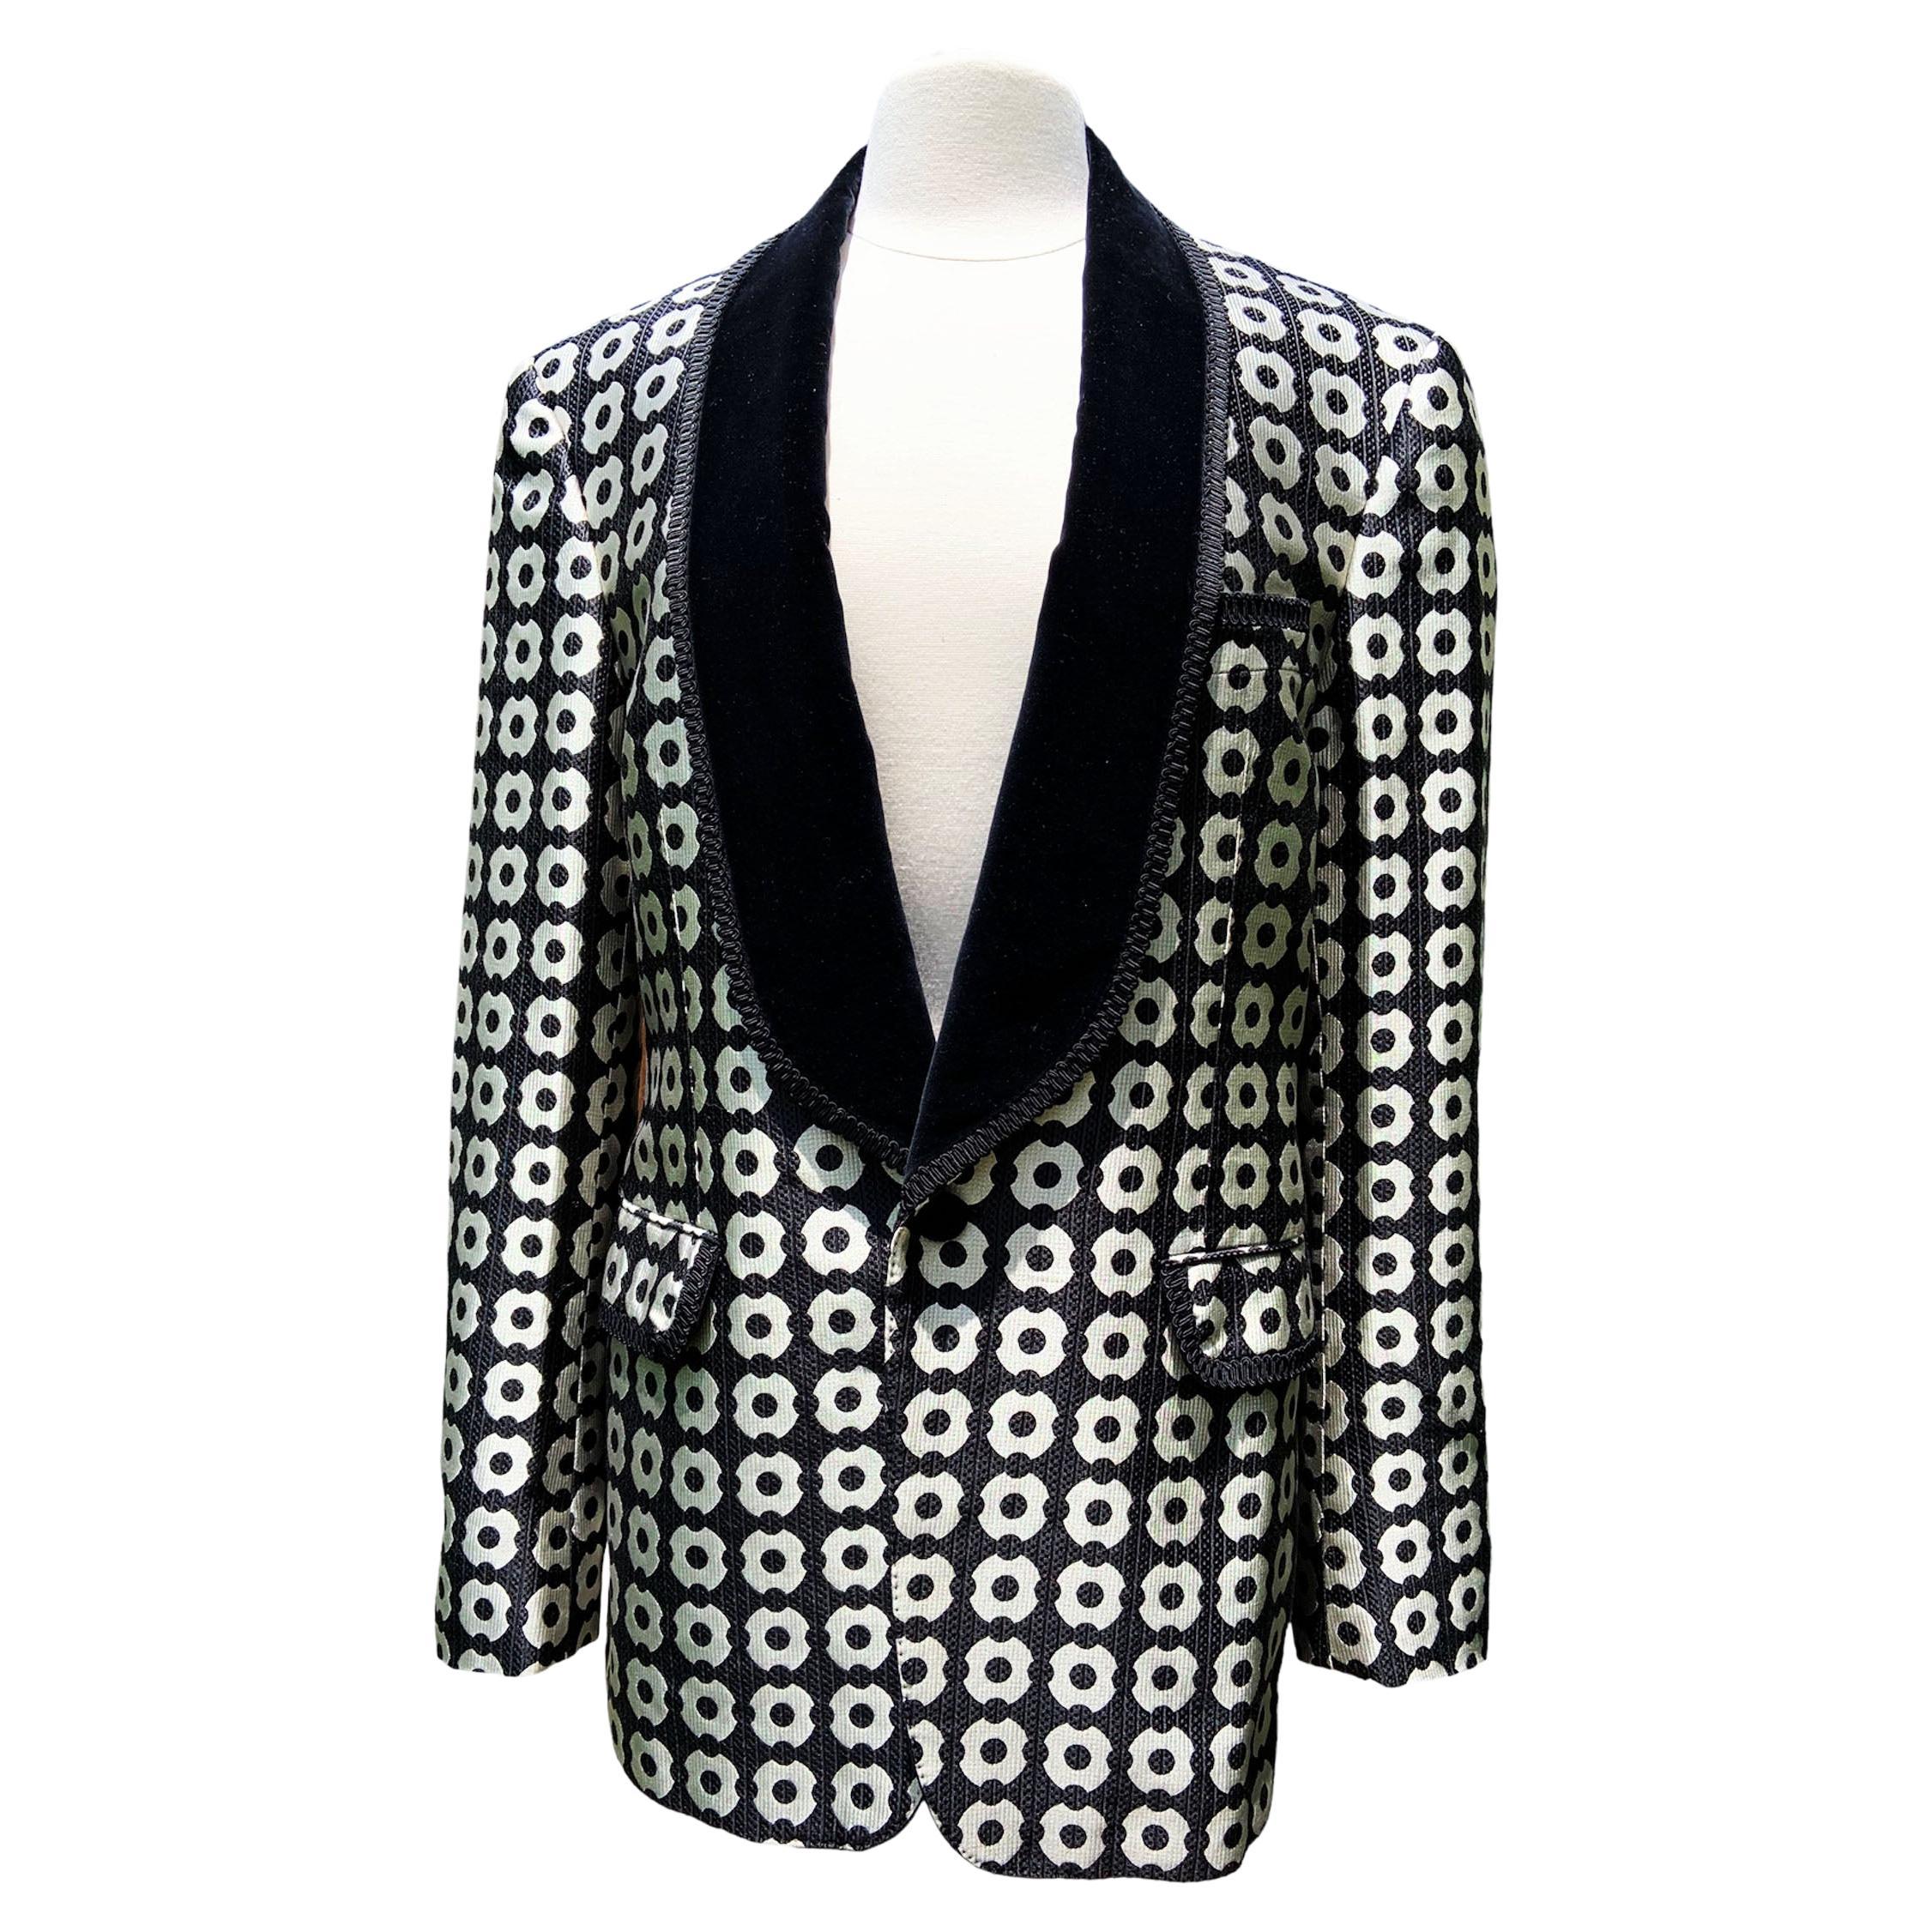 Tom Ford for Gucci F/W 2004 Runway Men's Tuxedo Cocktail Jacket It. 50 R